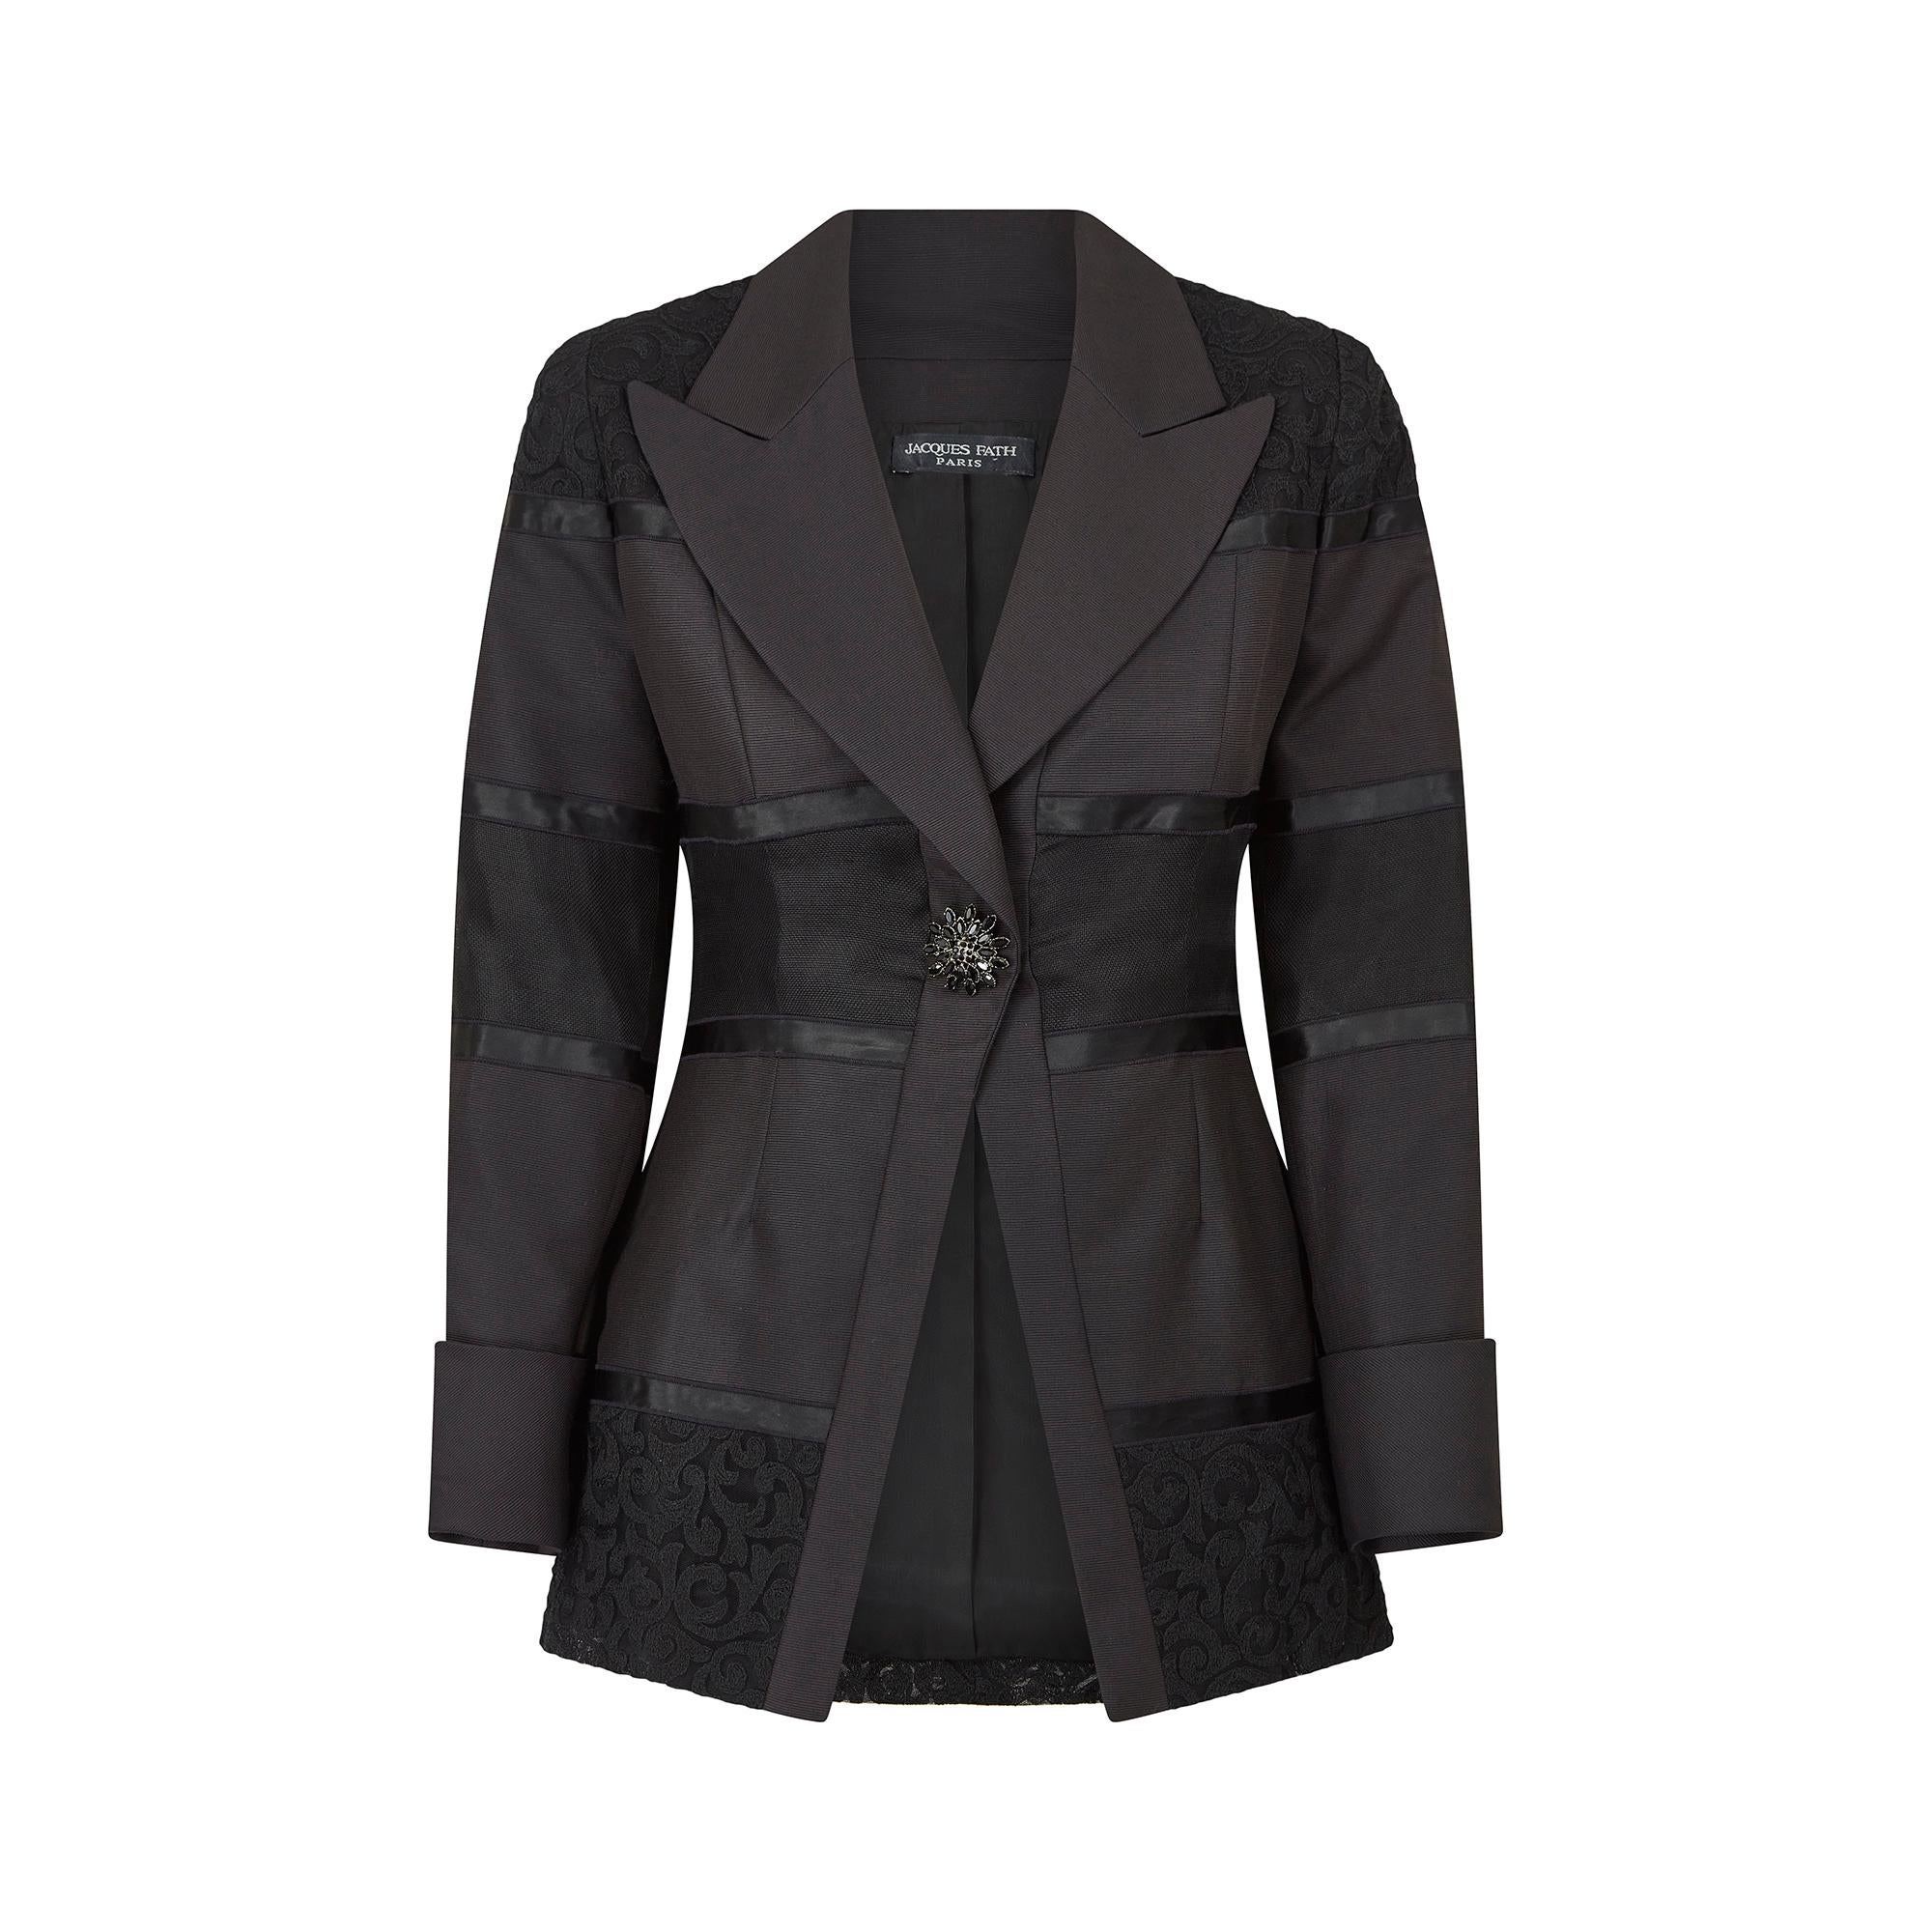 This documented Jacques Fath black cocktail jacket is from the Fall/Winter Ready-to-Wear Collection of 1998. It has wide pointed lapels and is cut from a thick woven black faille silk, with horizontal lace and ribbon panels. The shoulders, mid